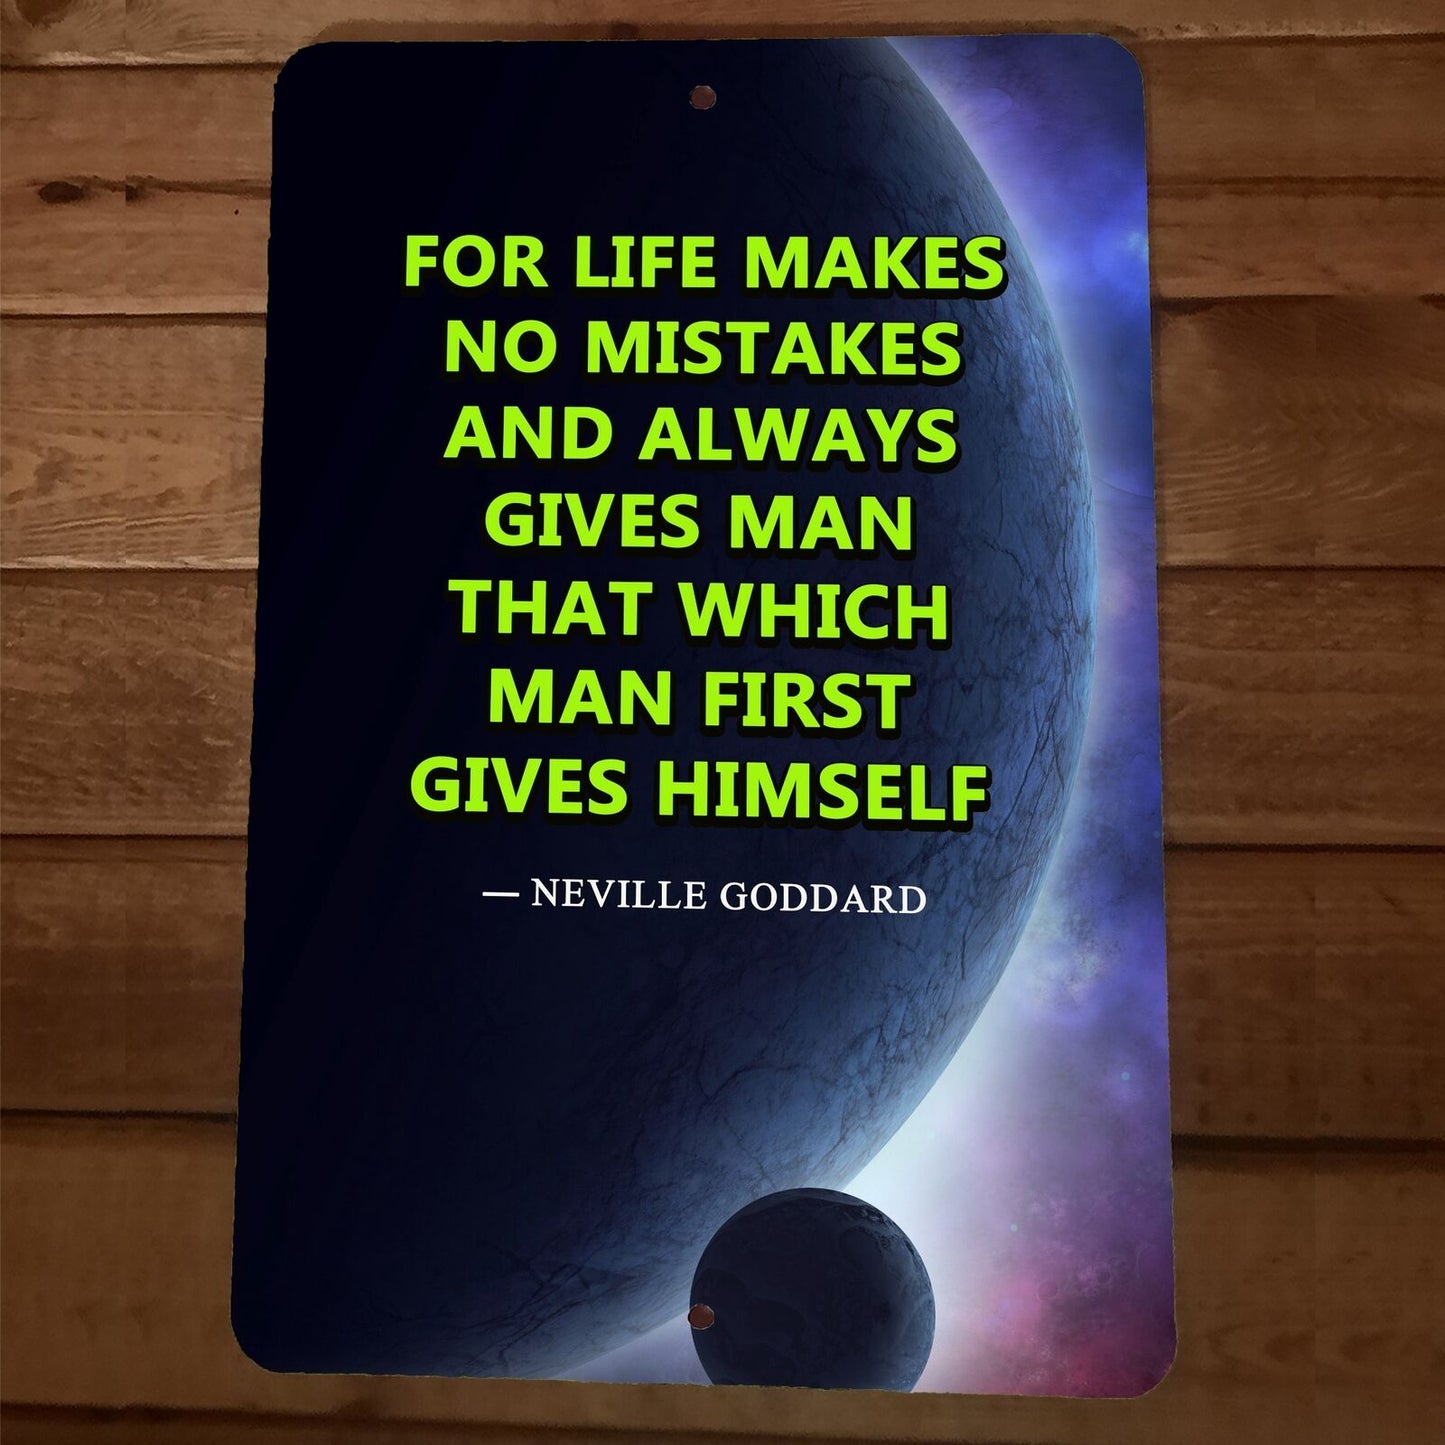 For Life Makes No Mistakes Quote Neville Goddard 8x12 Metal Wall Sign